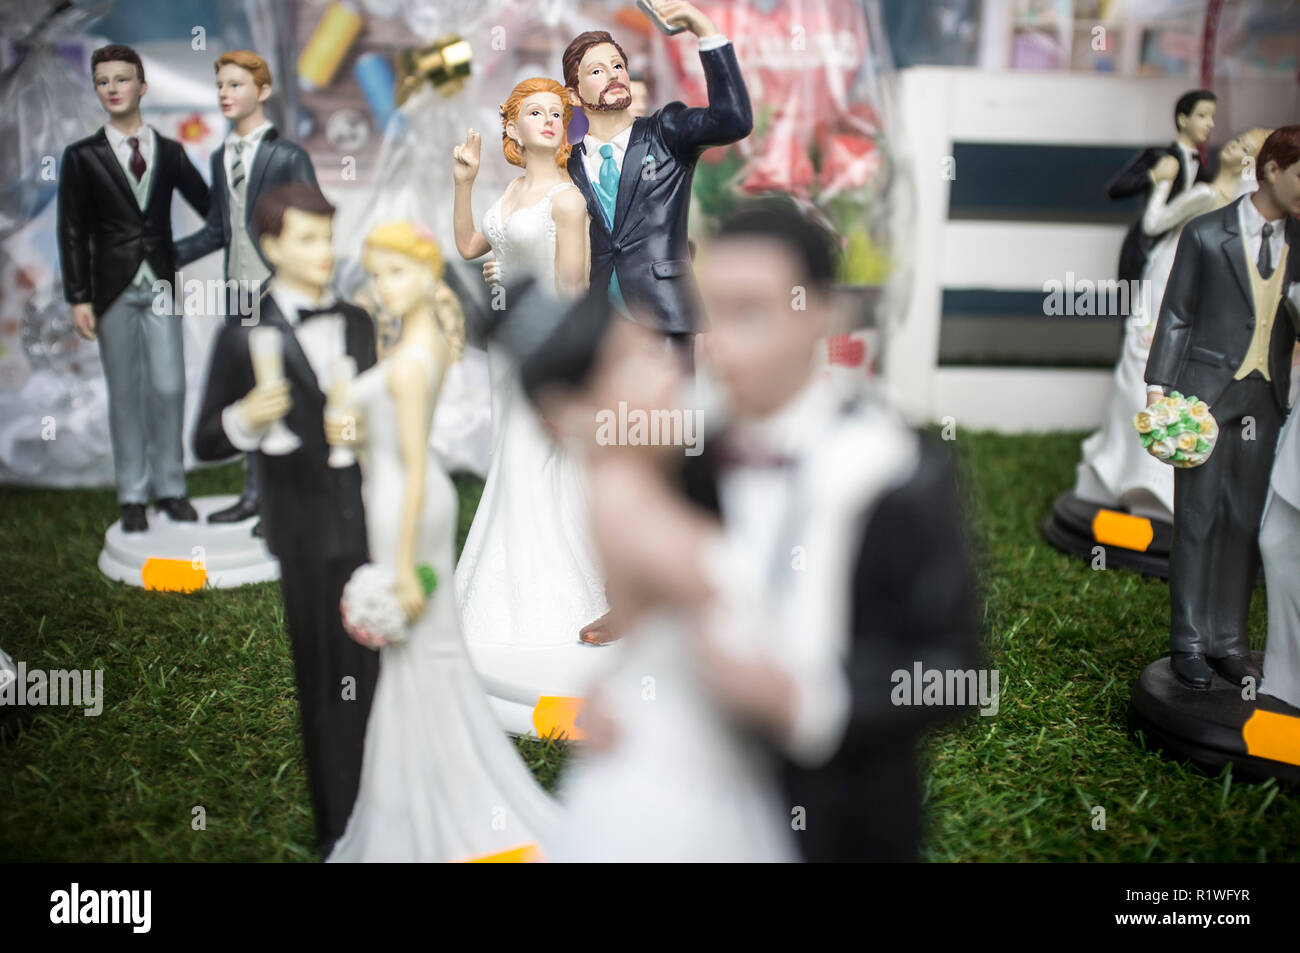 Badajoz, Spain - October 10th, 2018: Wedding cake figurines with a brides and bride. Couple taking selfies in focus Stock Photo